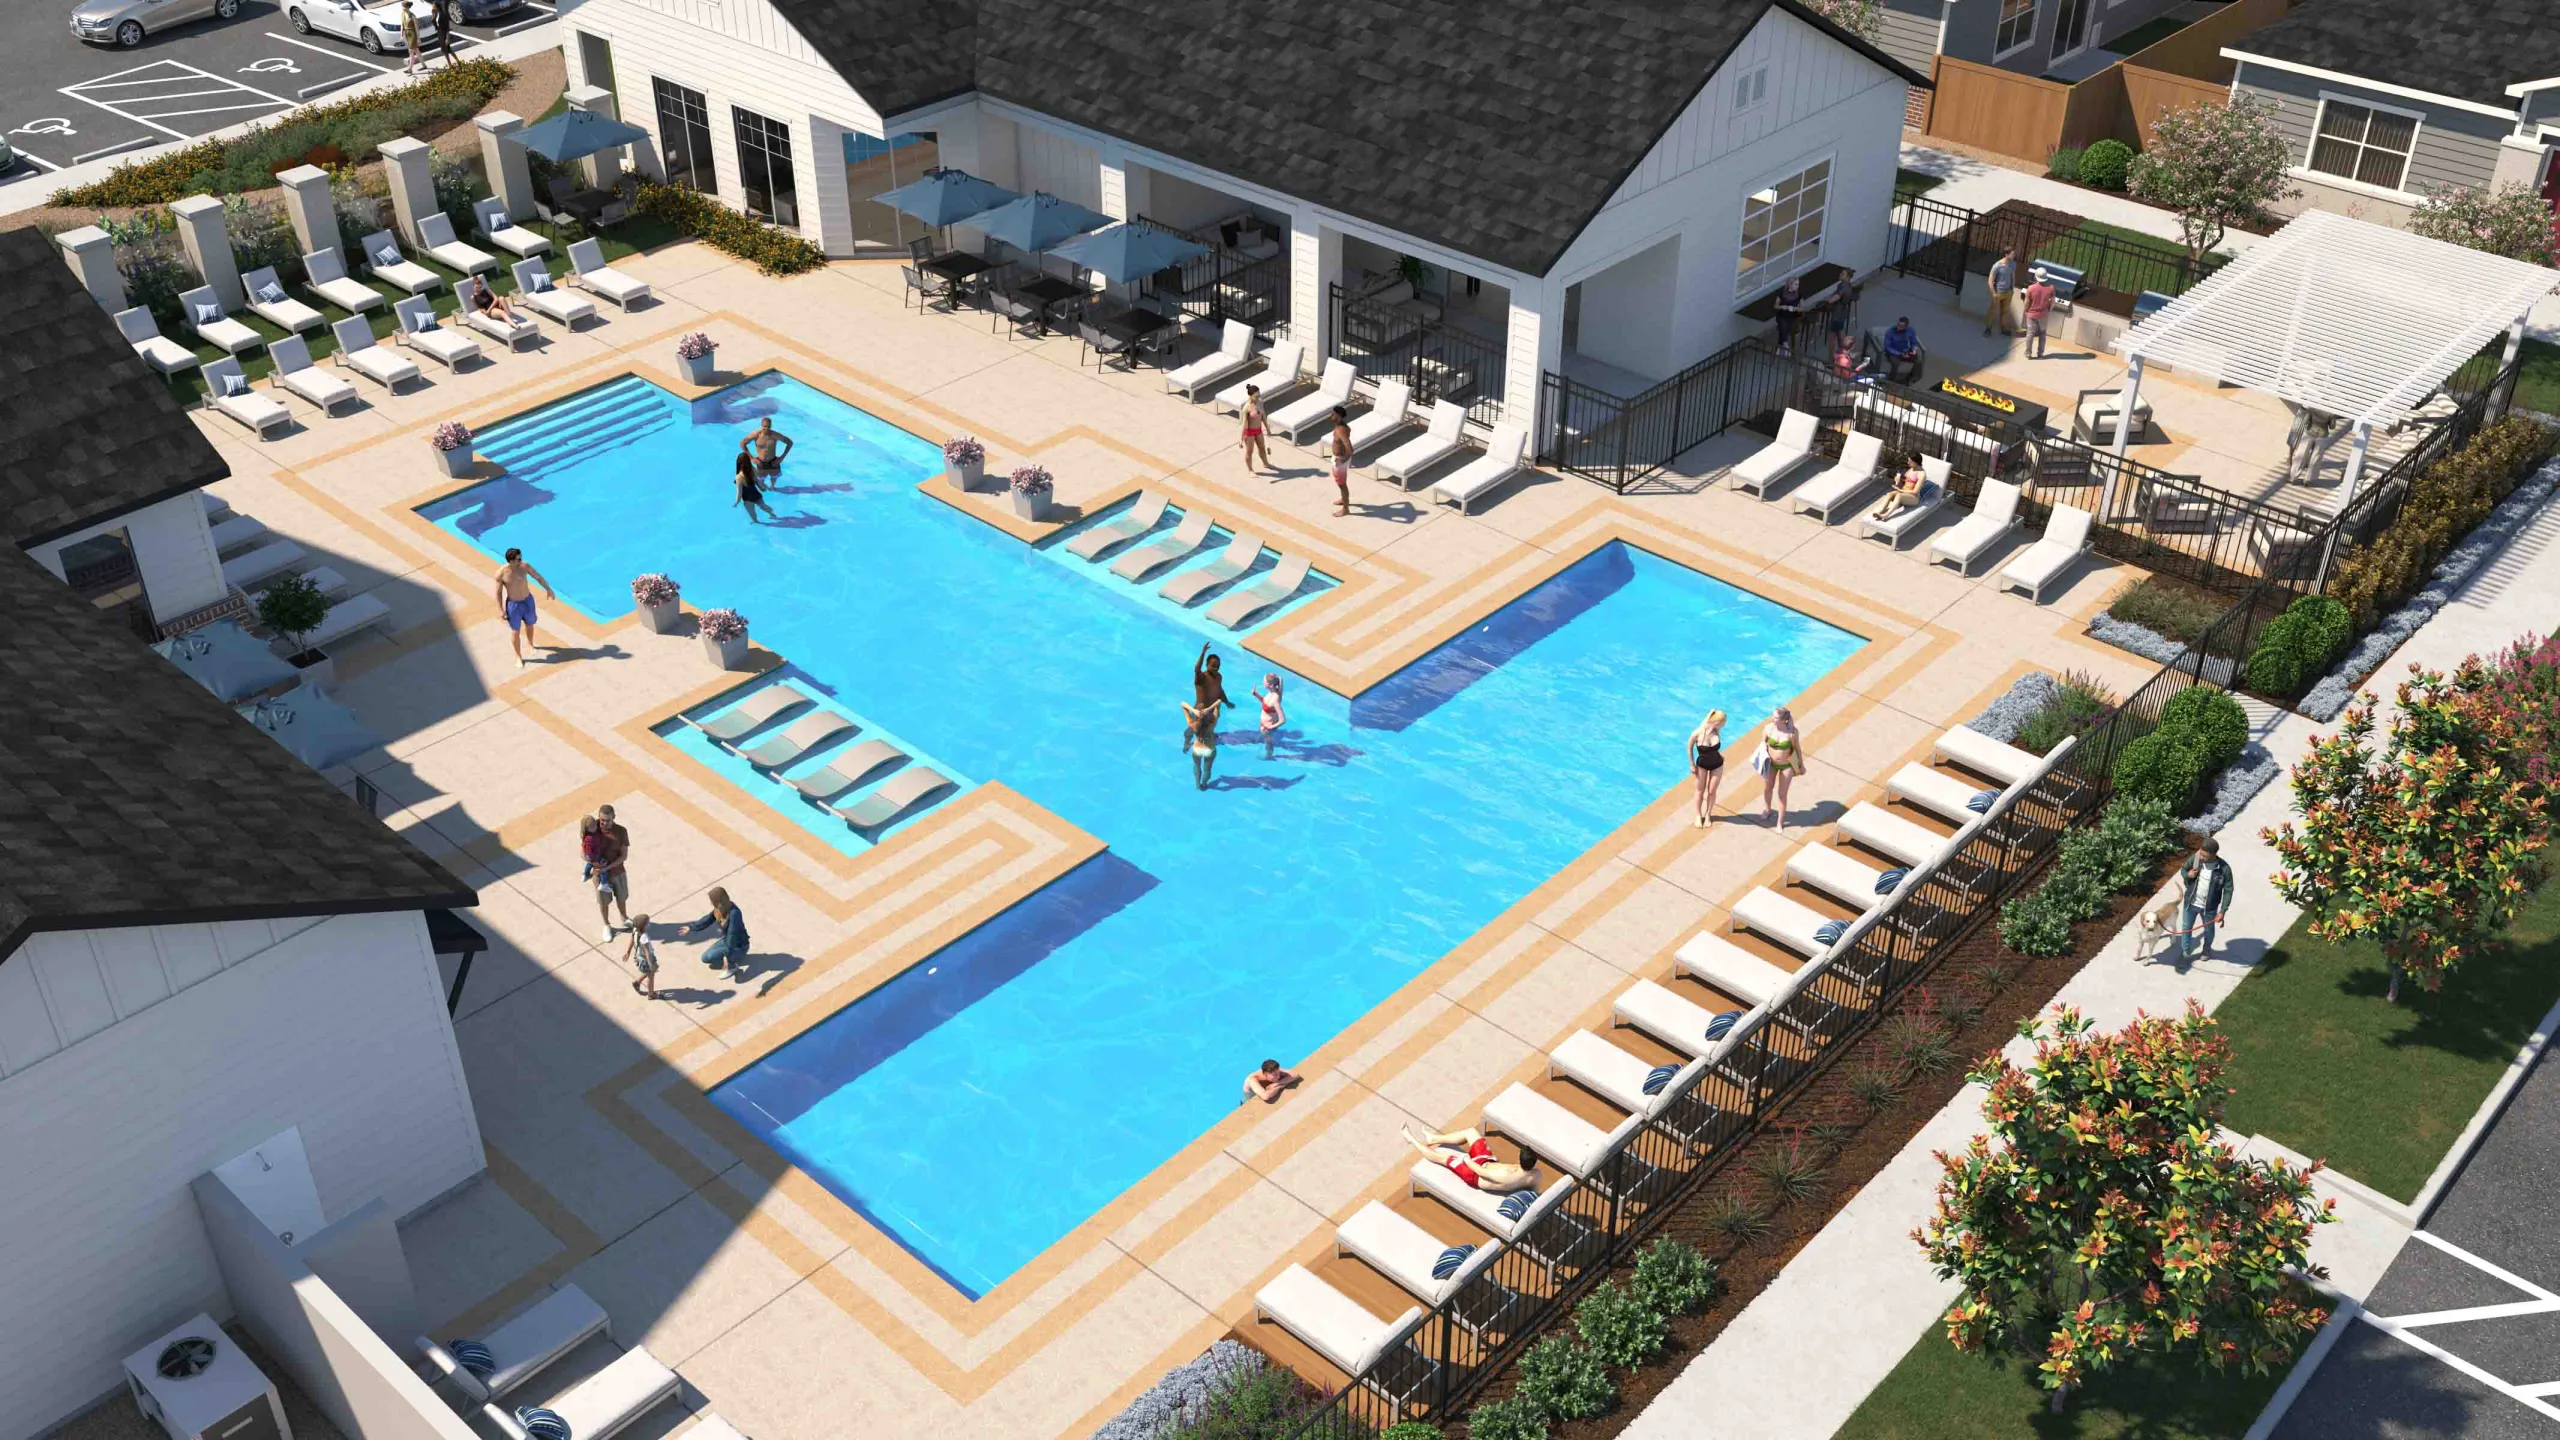 Arial amenity rendering of pool, clubhouse, and fitness center at Yardly Cypress. Leasing office is also in rendering where guests can meet staff and tour new rental homes with private fenced backyards.